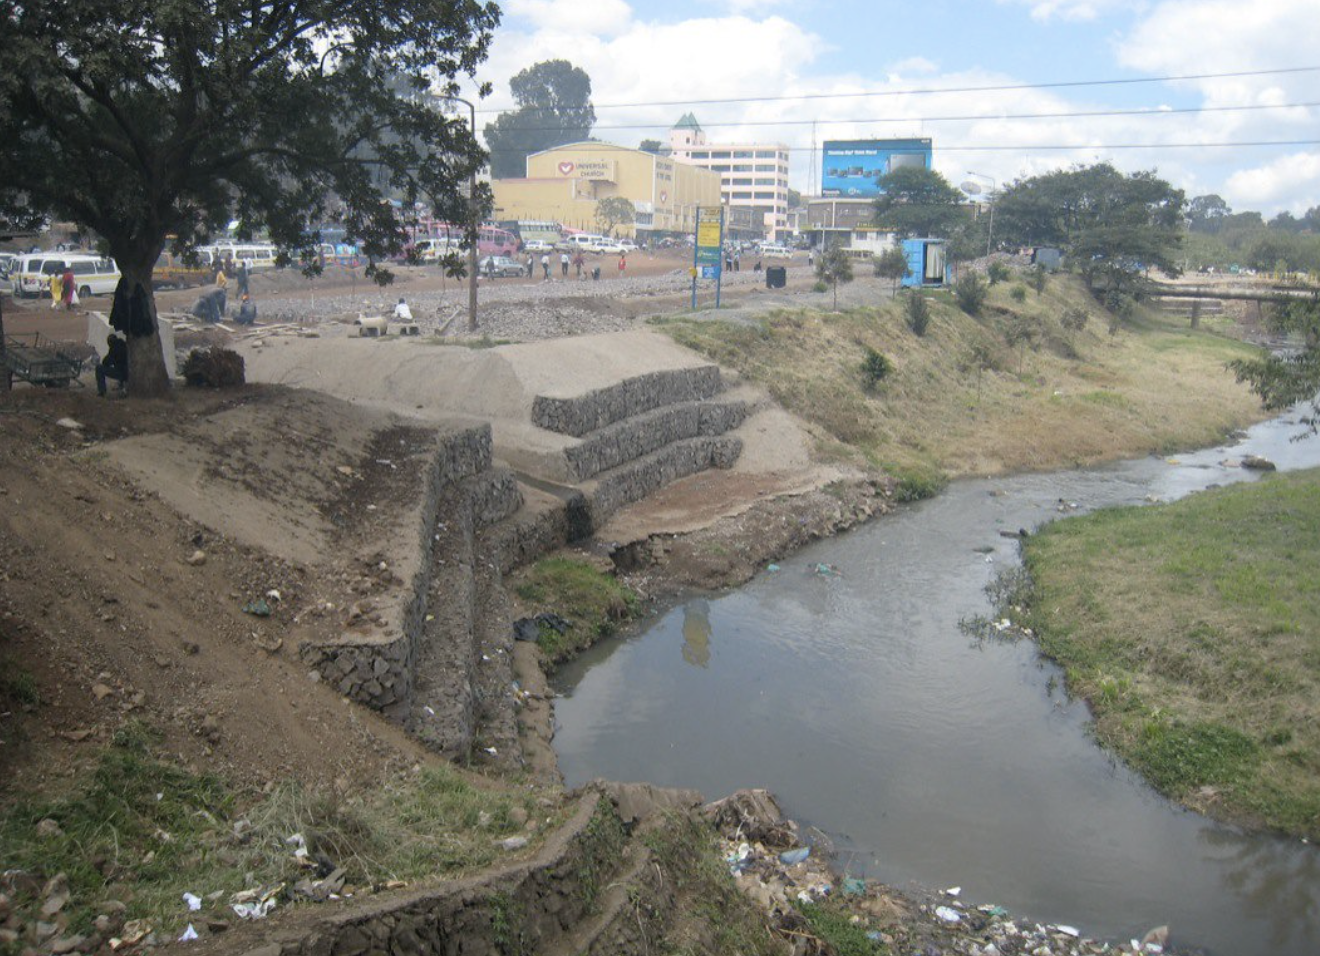 The Nairobi River looking west as it flows through the city, October 30, 2007 (Photo by yusunkwon) Creative Commons license via Flickr